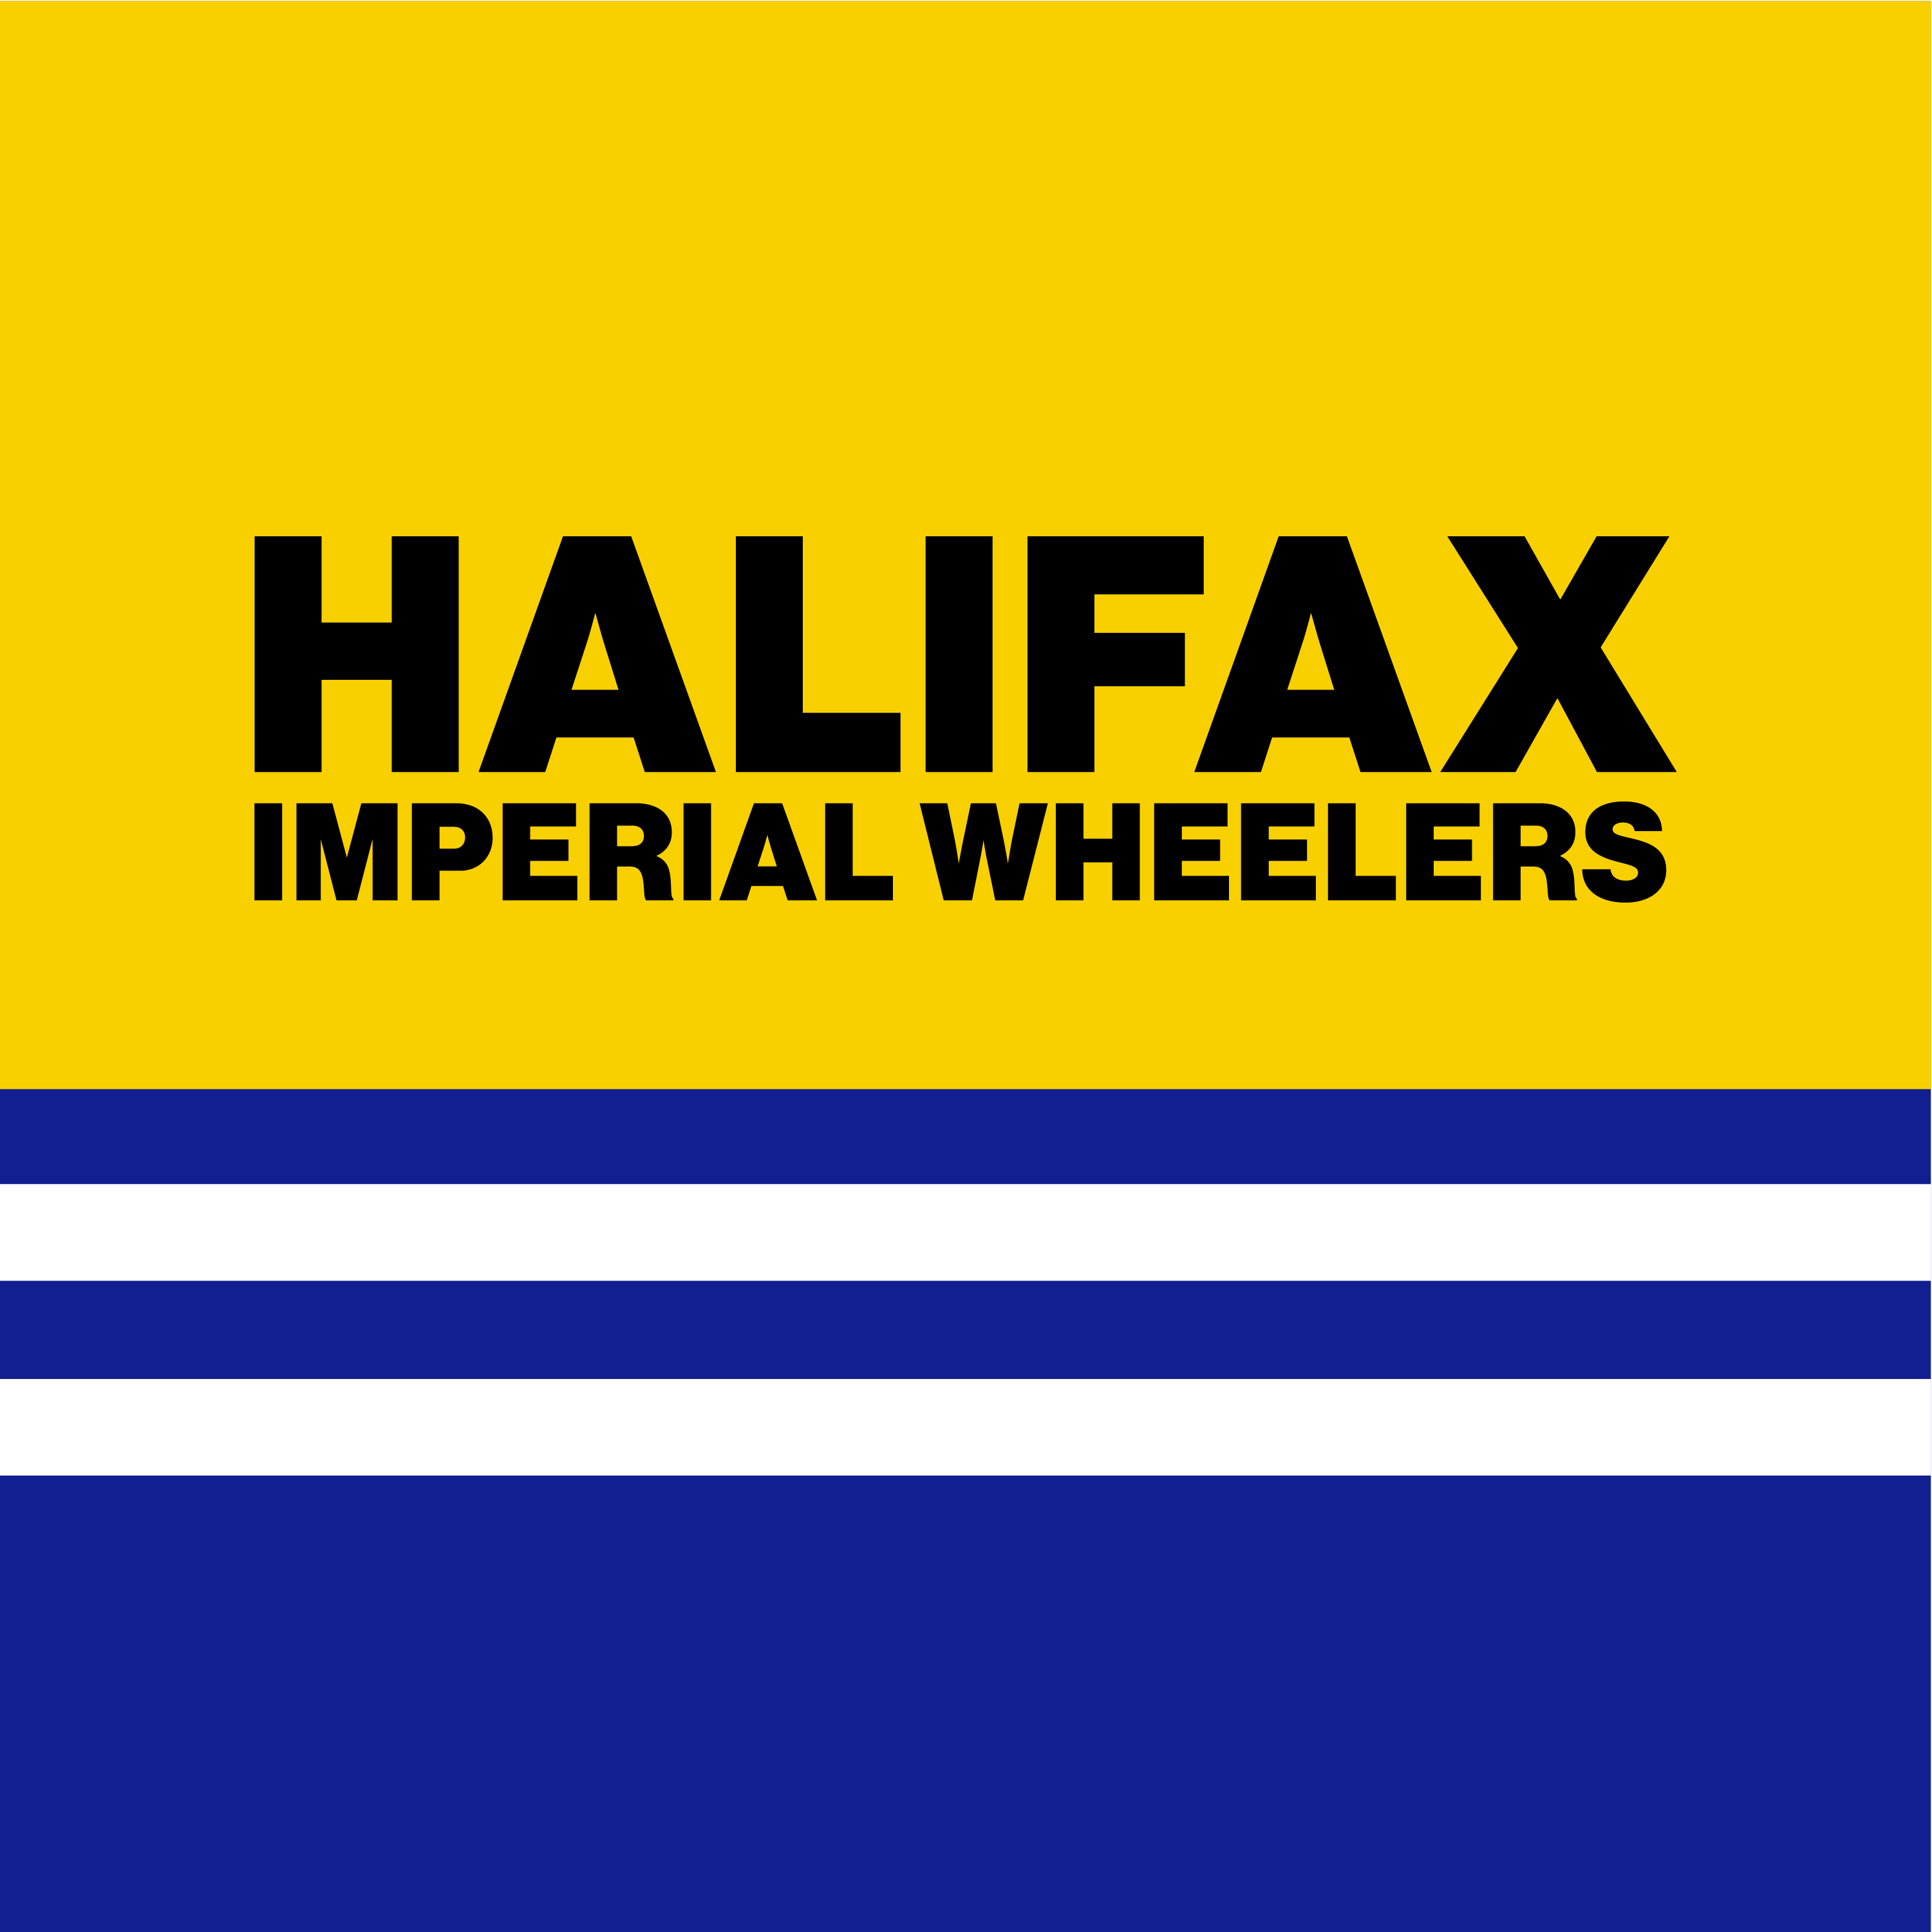 Club Image for HALIFAX IMPERIAL WHEELERS